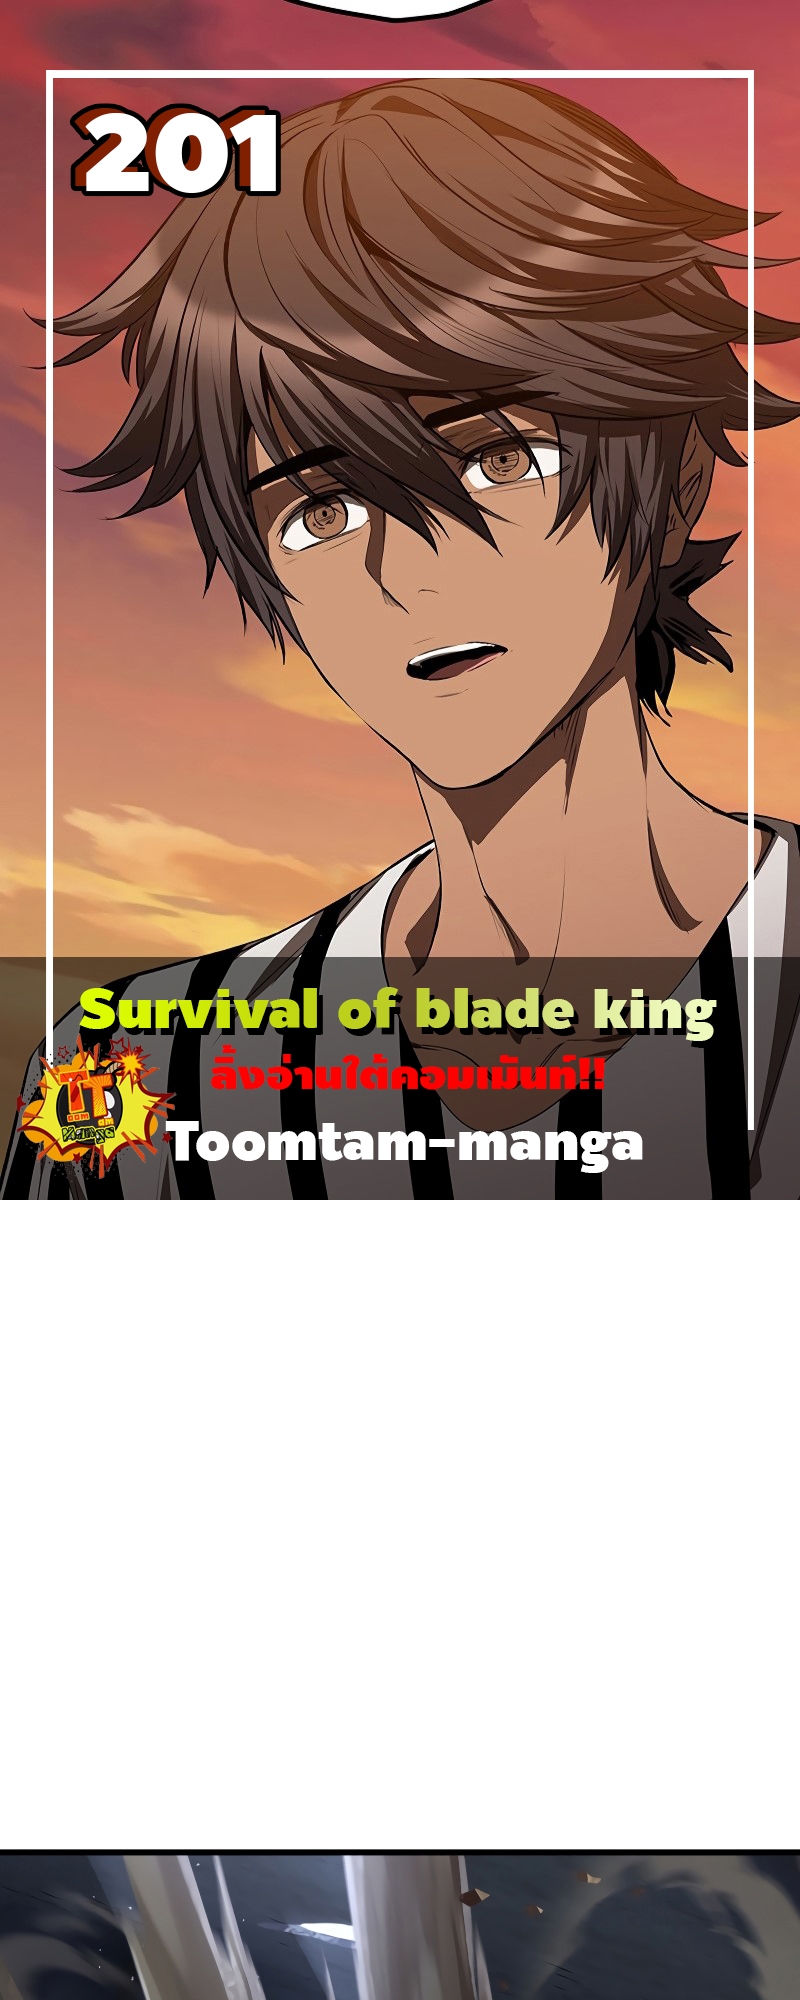 Survival of blade king 201 13 04 25670001